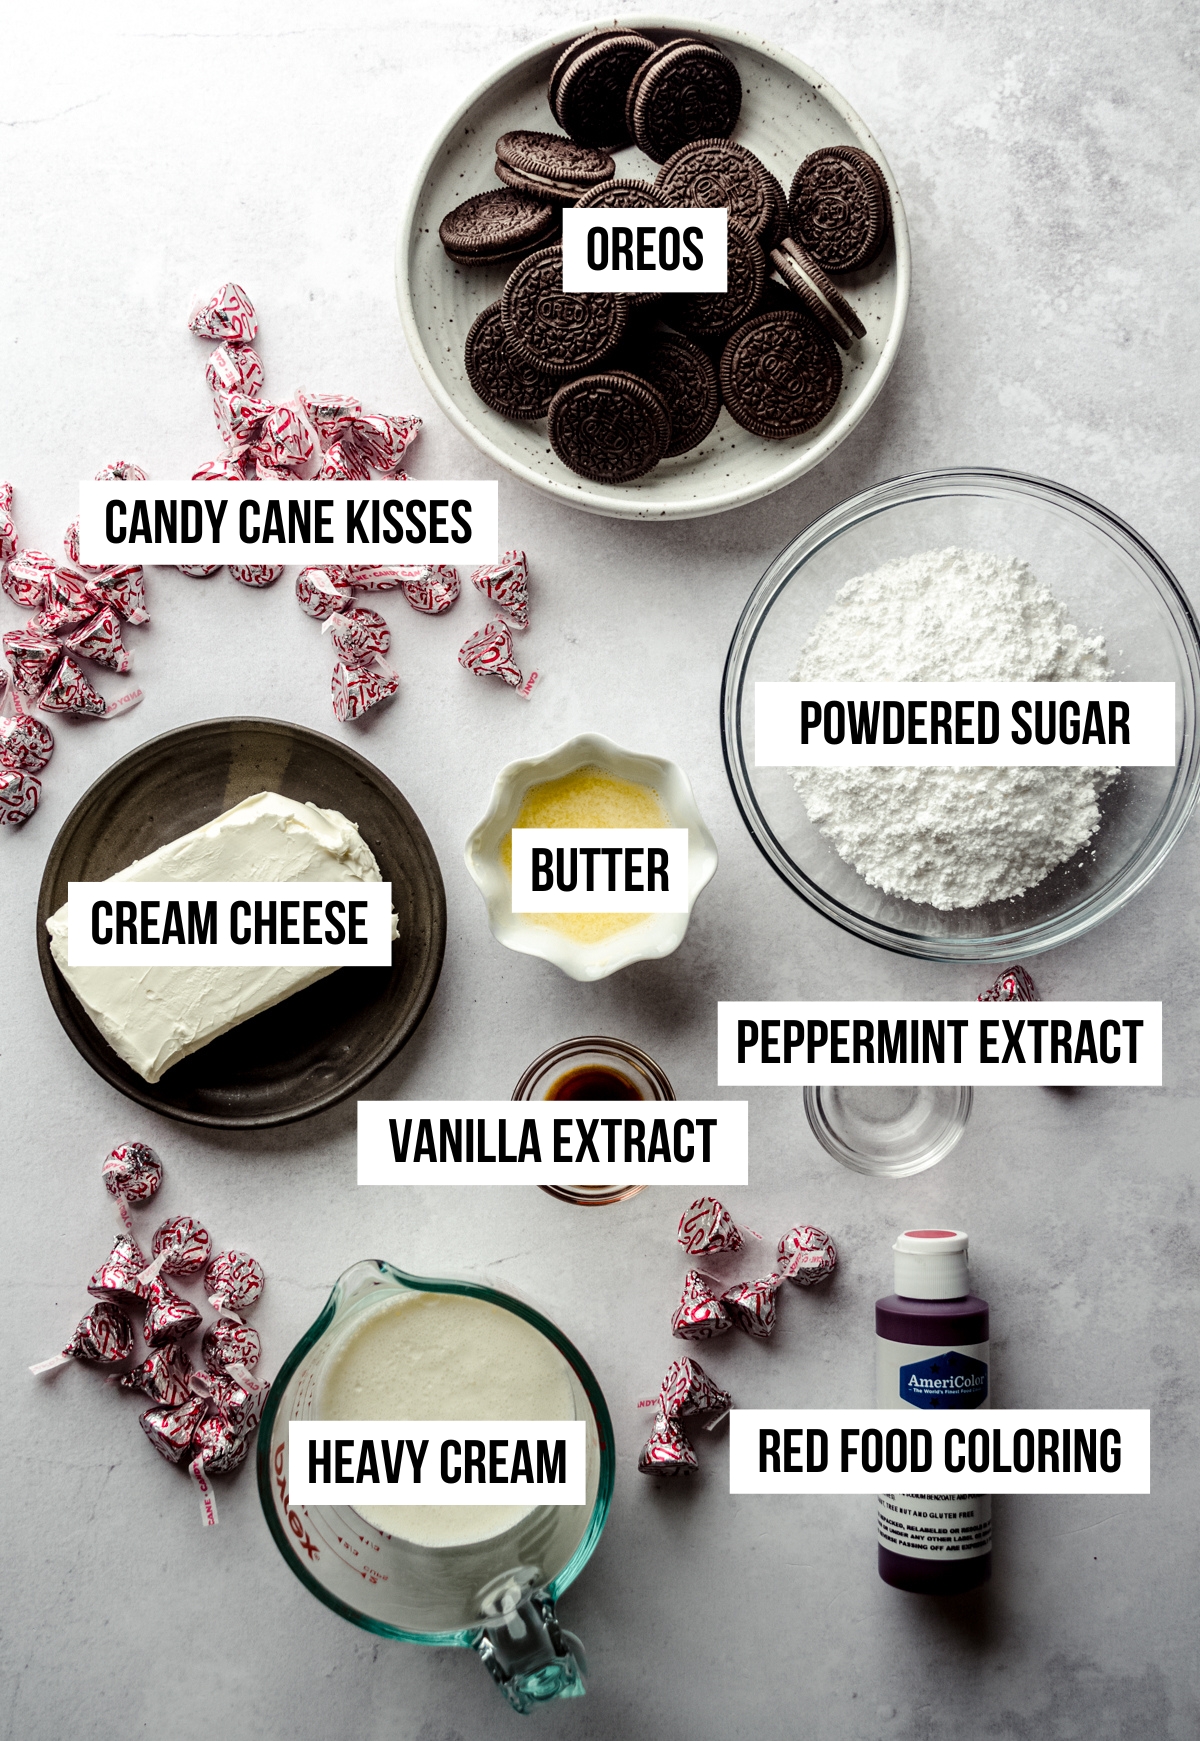 Aerial photo of ingredients for no bake peppermint pie with text overlay.